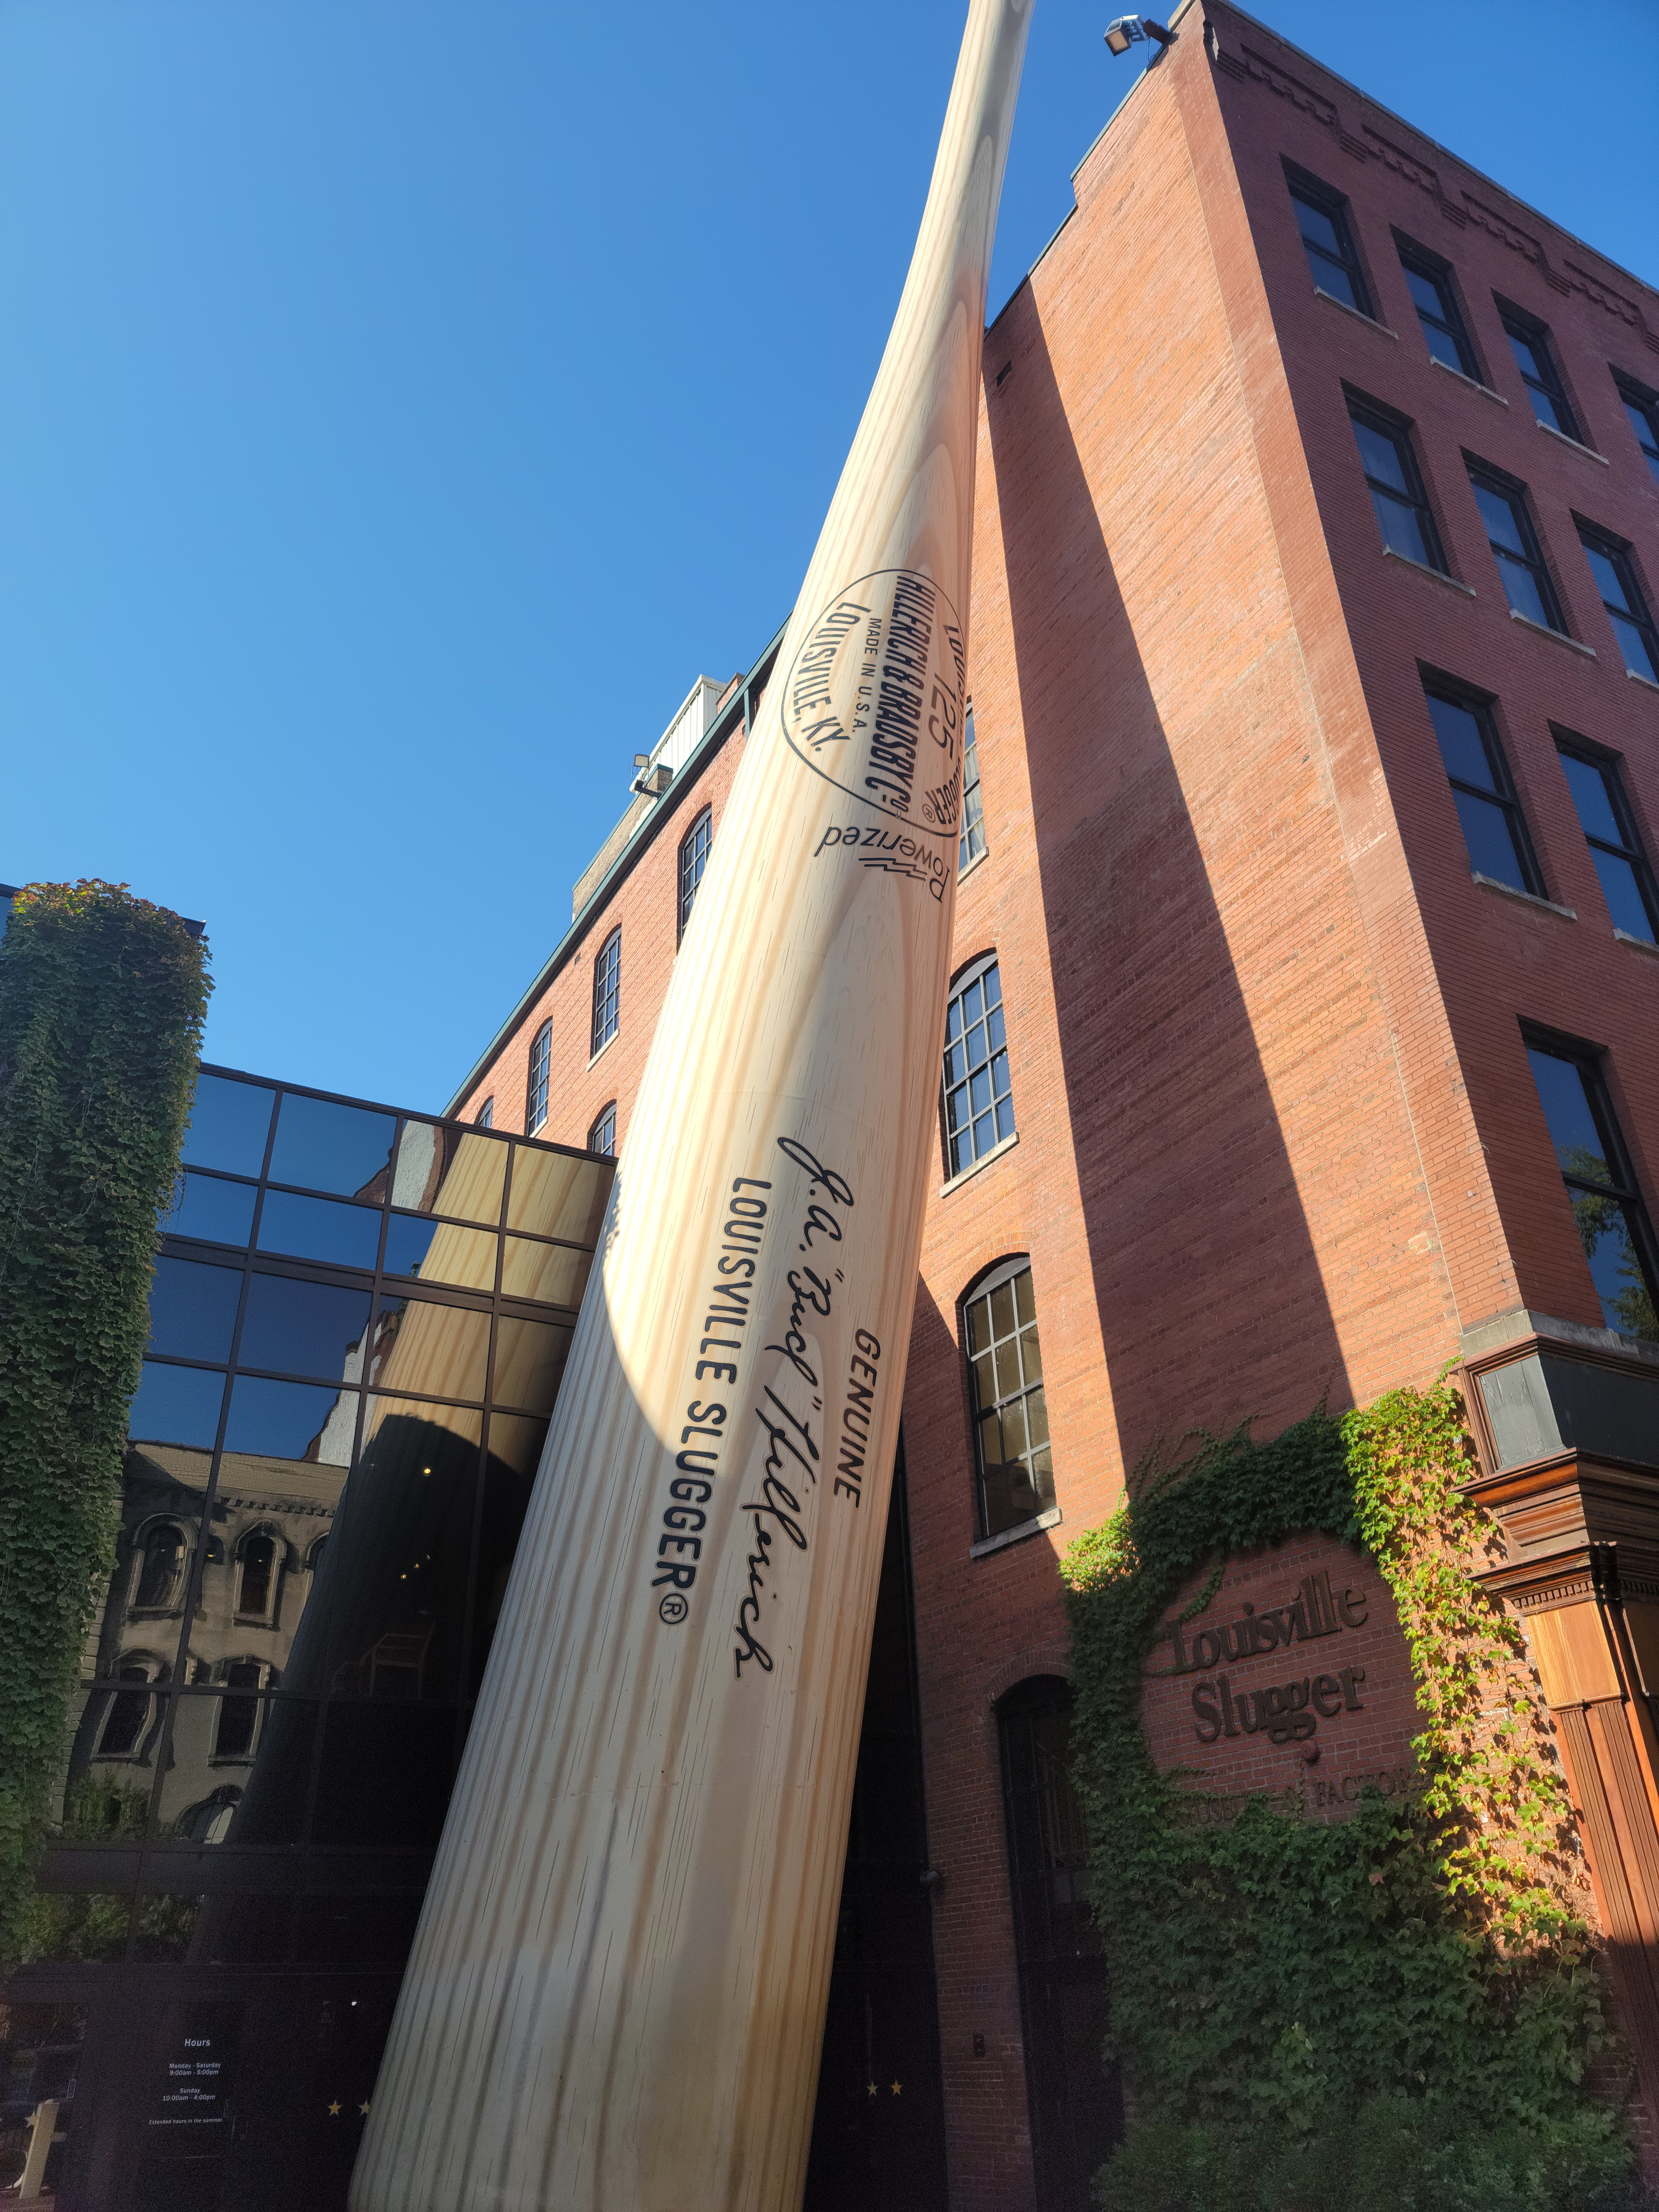 Picture of a place: Louisville Slugger Museum &amp; Factory